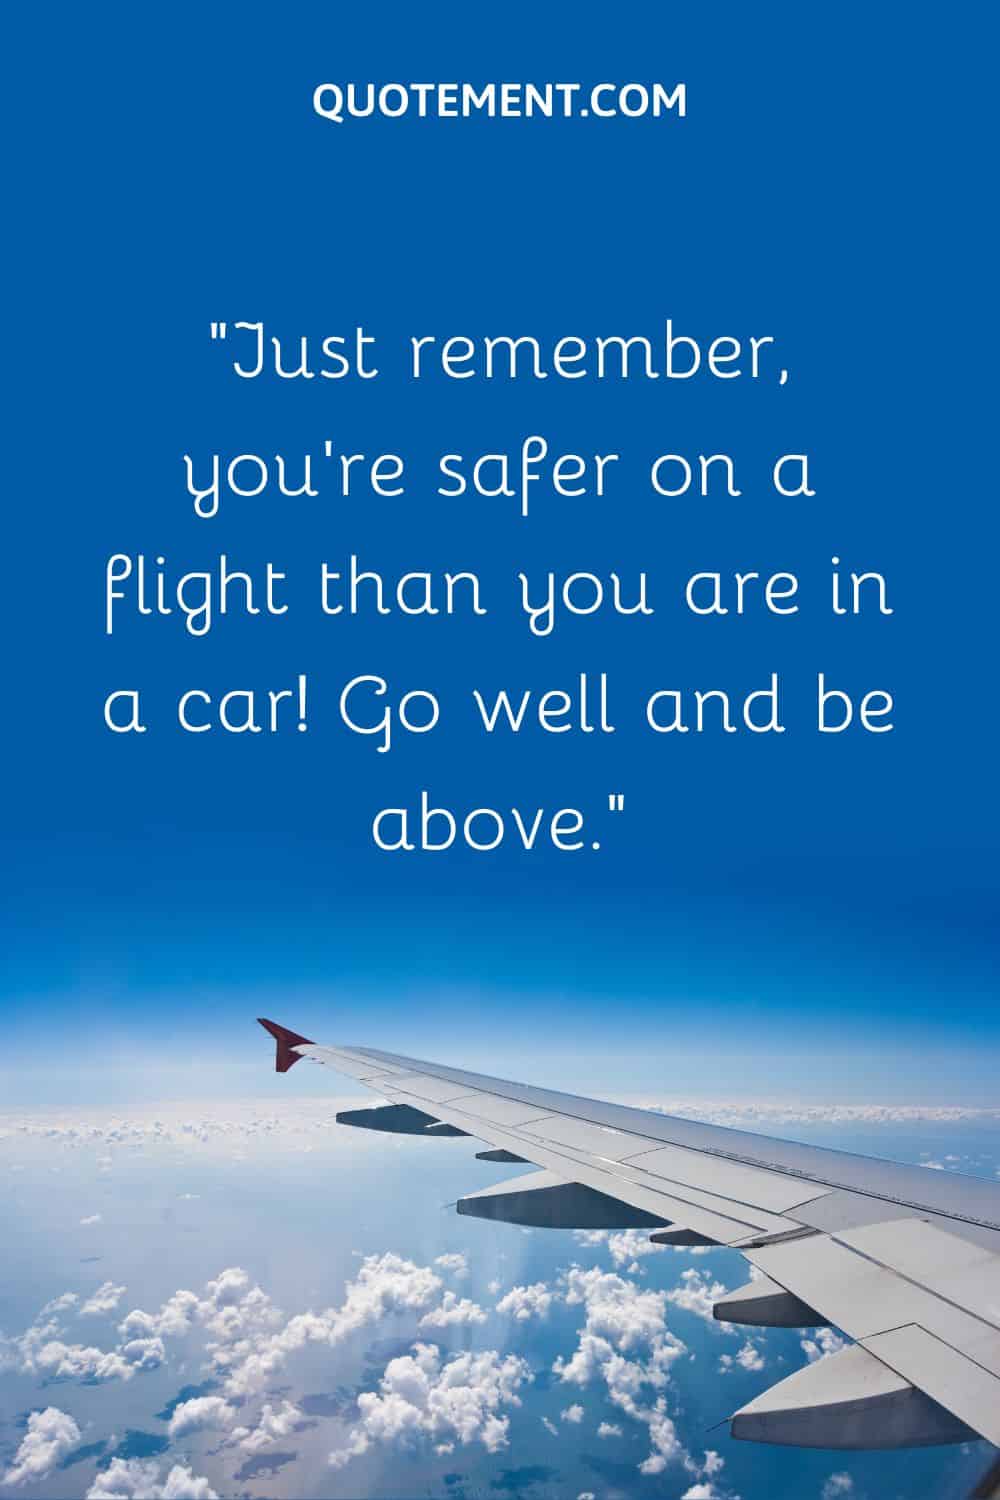 Just remember, you’re safer on a flight than you are in a car